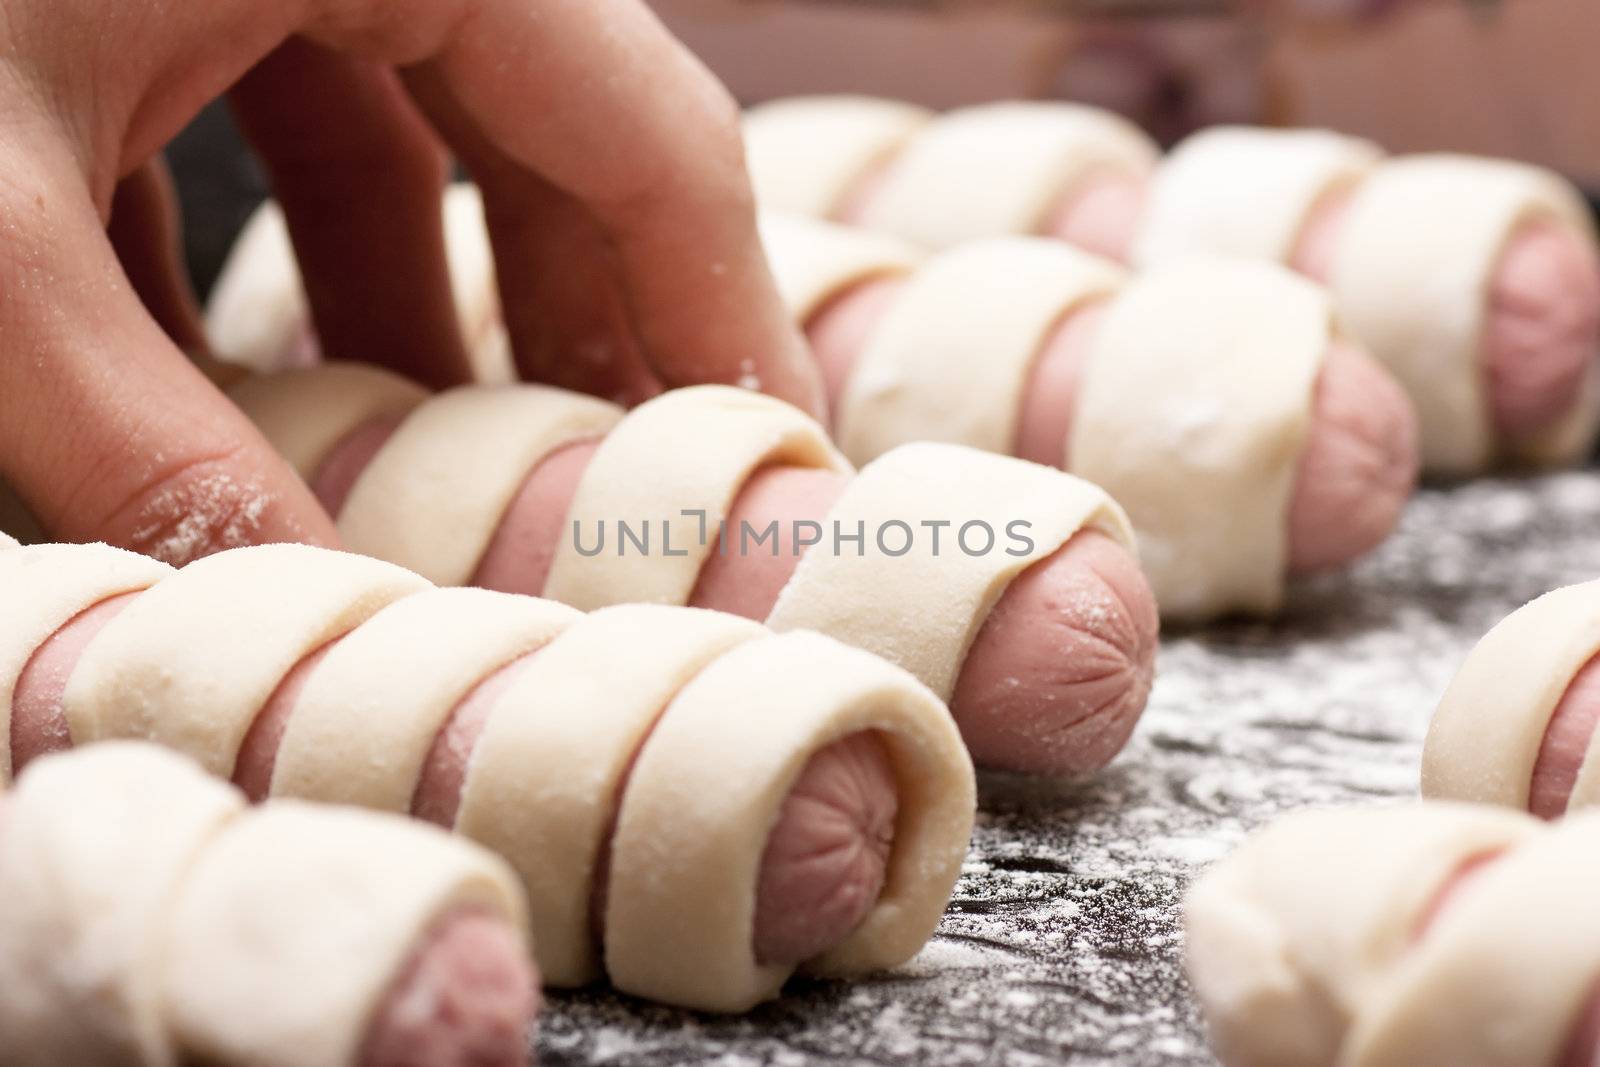 Raw sausage rolls in pastry on a baking tray